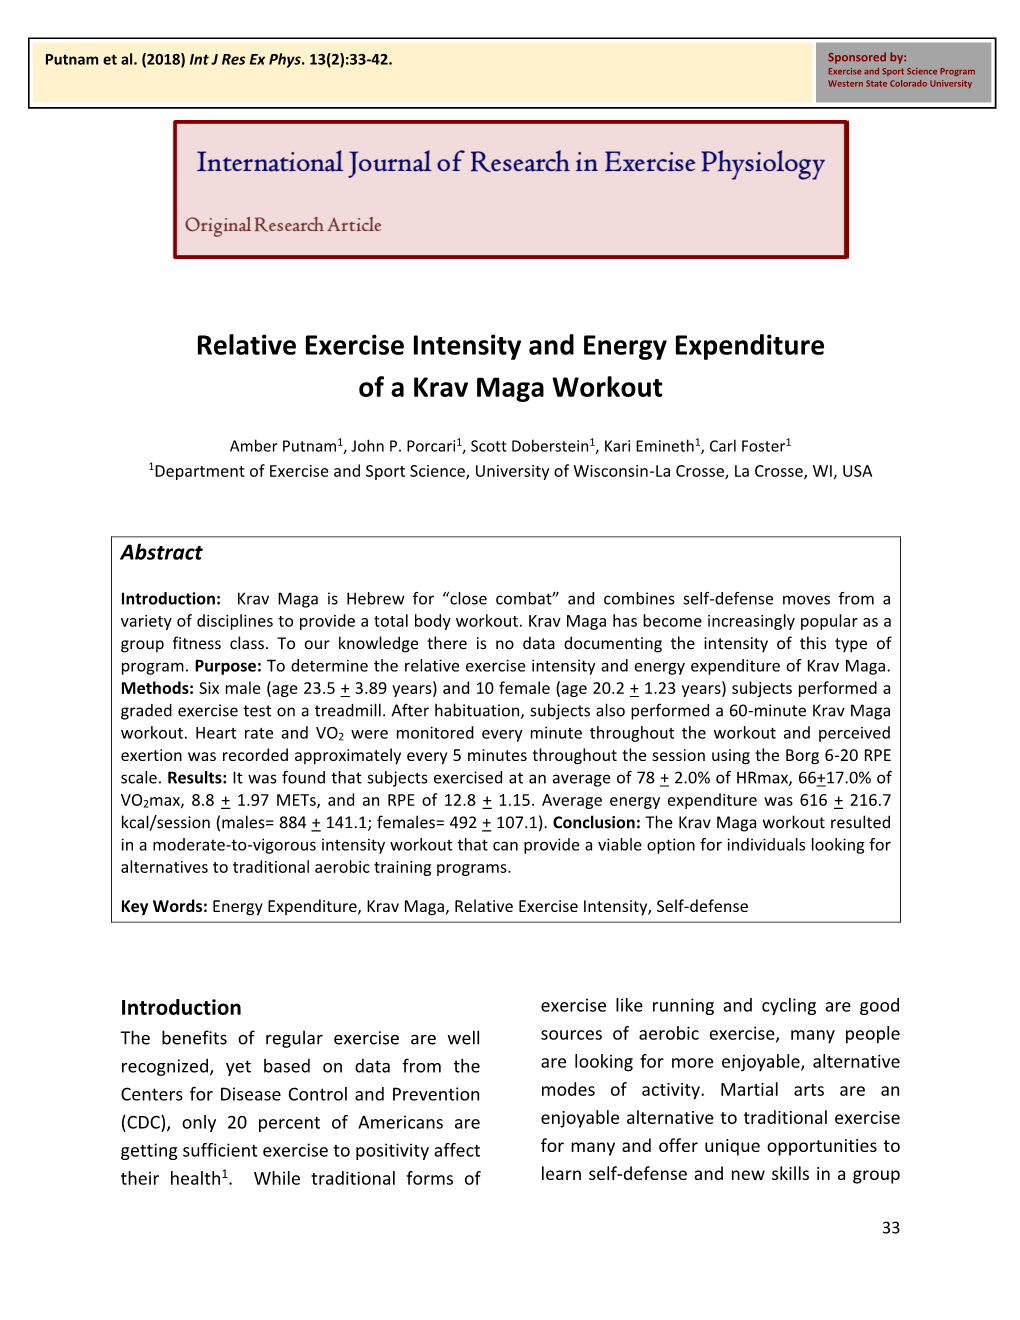 Relative Exercise Intensity and Energy Expenditure of a Krav Maga Workout